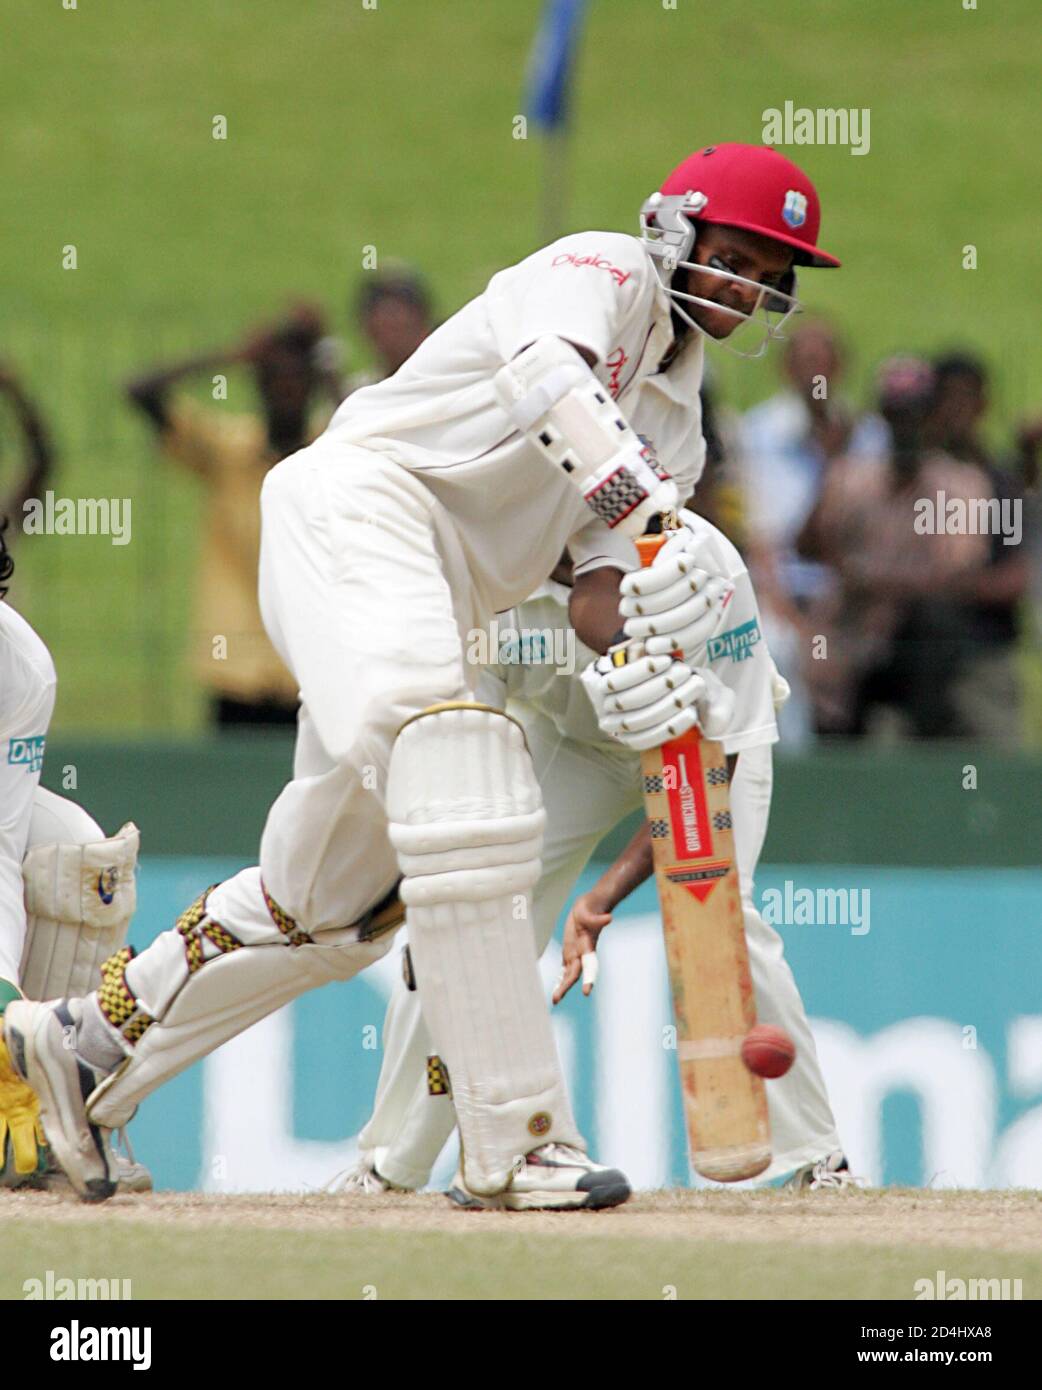 West Indies' batsman Shivnarine Chanderpaul hits a boundary against Sri Lanka during their fourth day of first test cricket match in Colombo, Sri Lanka July 16, 2005. Sri Lanka, chasing 172 for victory, were 25 without loss at lunch on the fourth day of the first test against West Indies on Saturday. Earlier, Muttiah Muralitharan had taken 6-36 to skittle out the West Indies for 113. REUTERS/Anuruddha Lokuhapuarachchi  AL/JJ Stock Photo